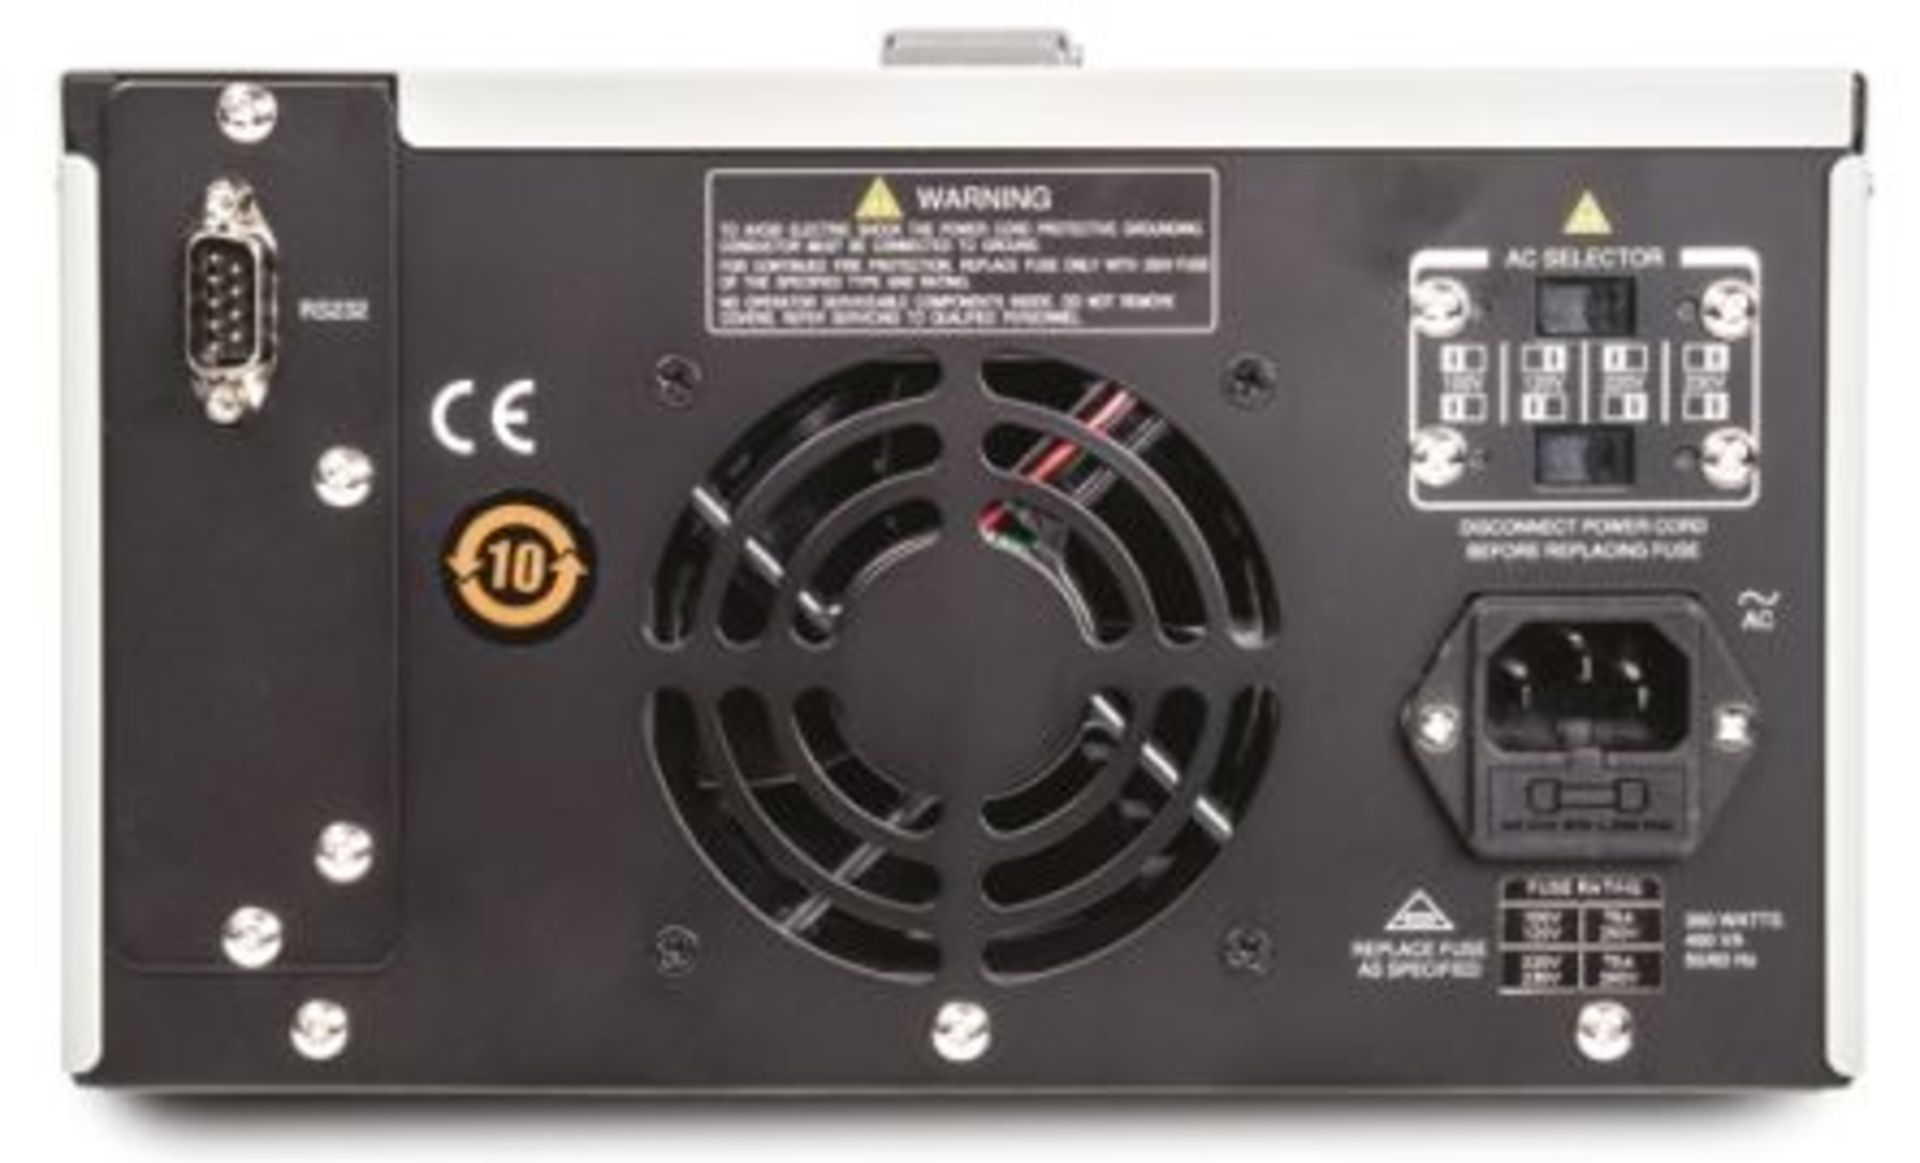 ISO-TECH IPS3202 Digital Bench Power Supply, 3 Output 0-32 V, 0-6 V 500 mA, 0- 2 A 158W - Image 4 of 4